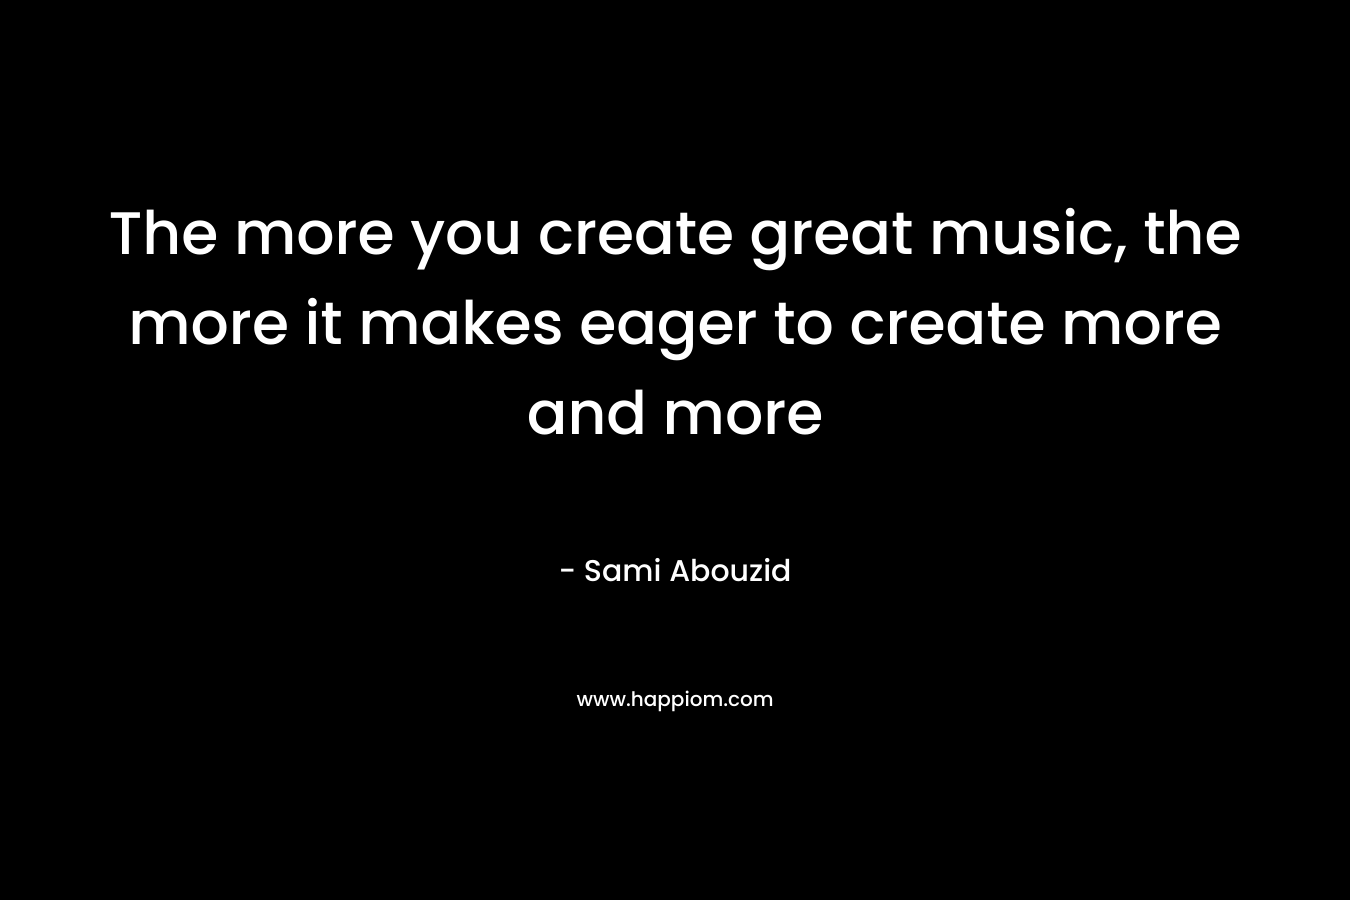 The more you create great music, the more it makes eager to create more and more – Sami Abouzid